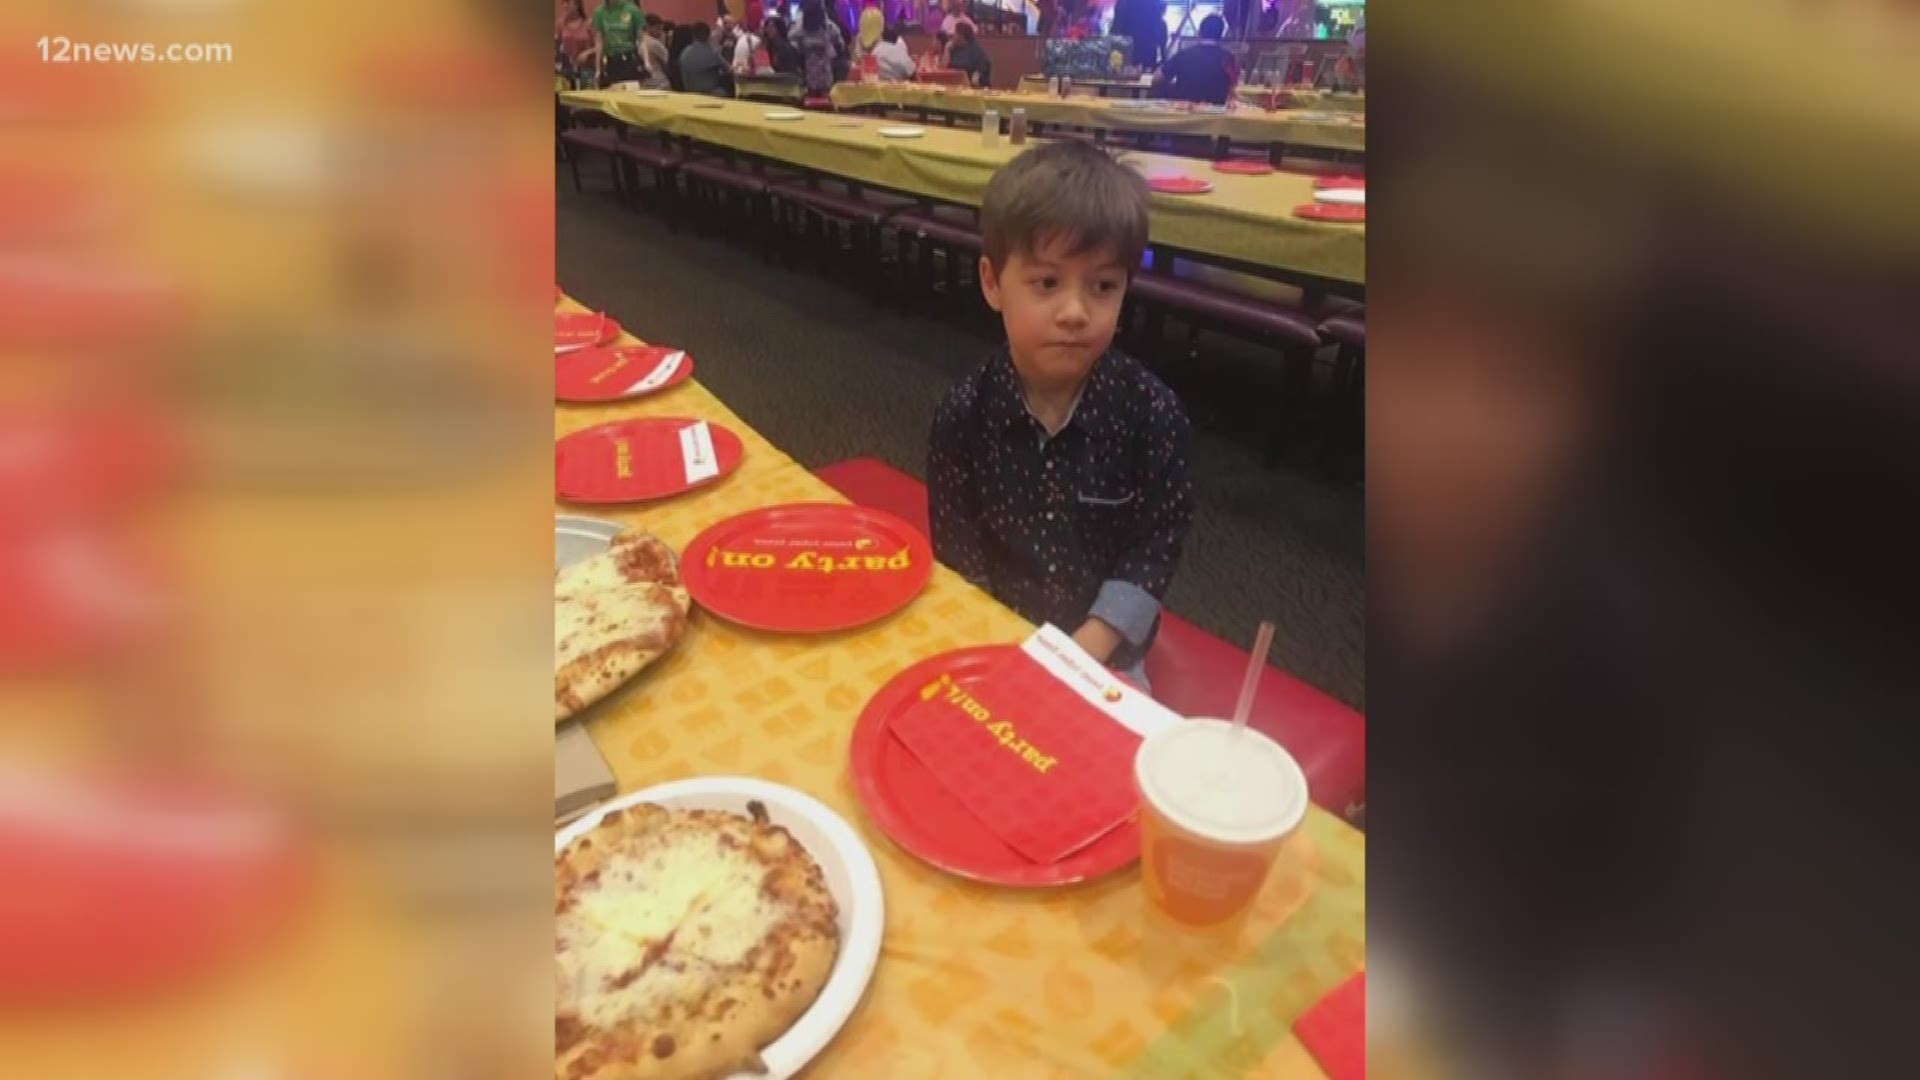 Teddy is a Tucson boy whose friends didn't show up to his sixth birthday party. His upset mother posted pictures of him on Facebook looking upset, and the post went viral.